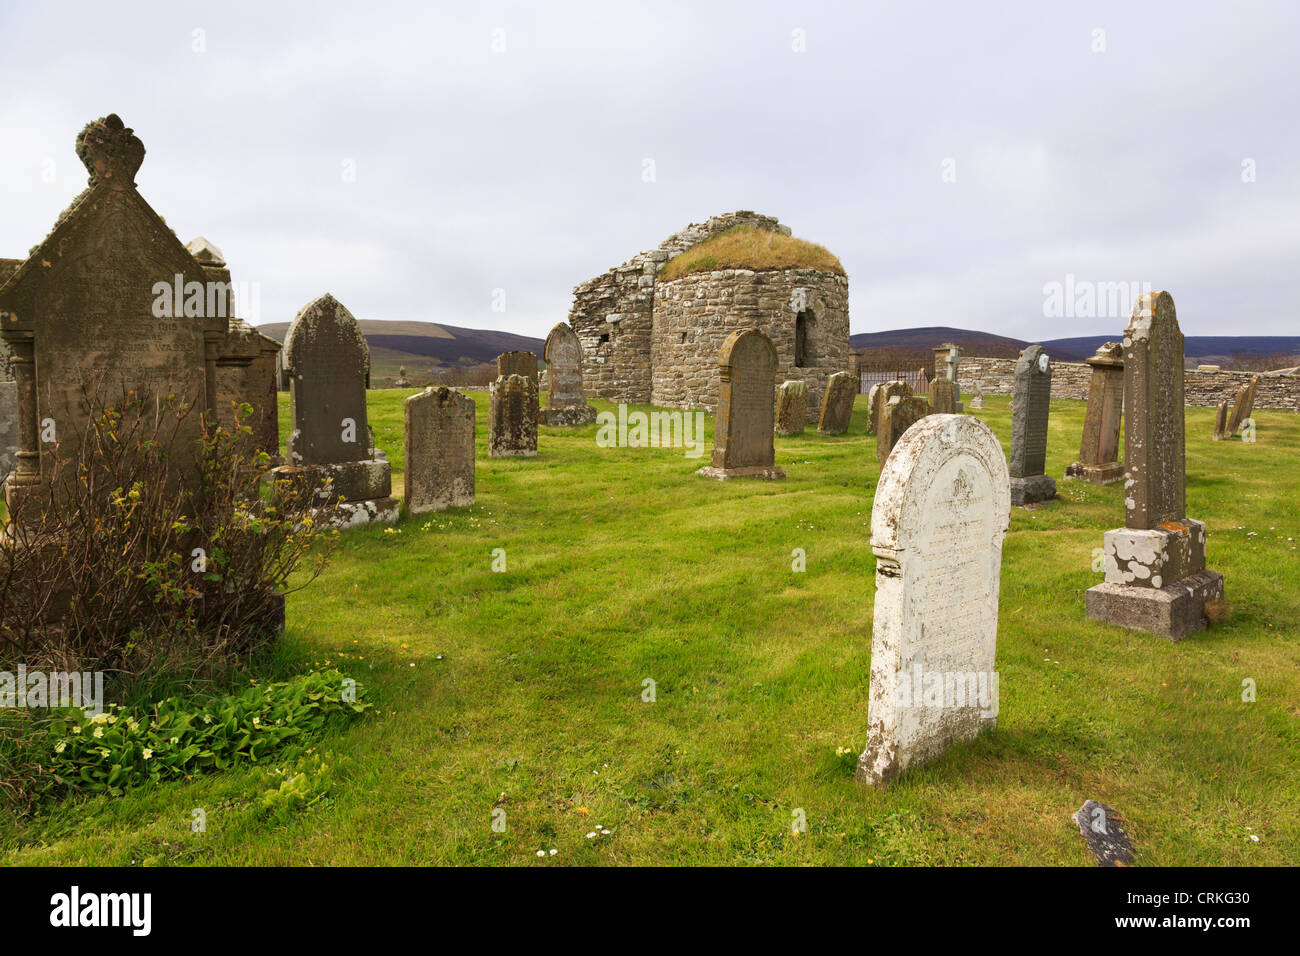 Ruins of 12th century Round Kirk (church of St Nicholas) with old gravestones in churchyard at Orphir Orkney Islands Scotland UK Stock Photo